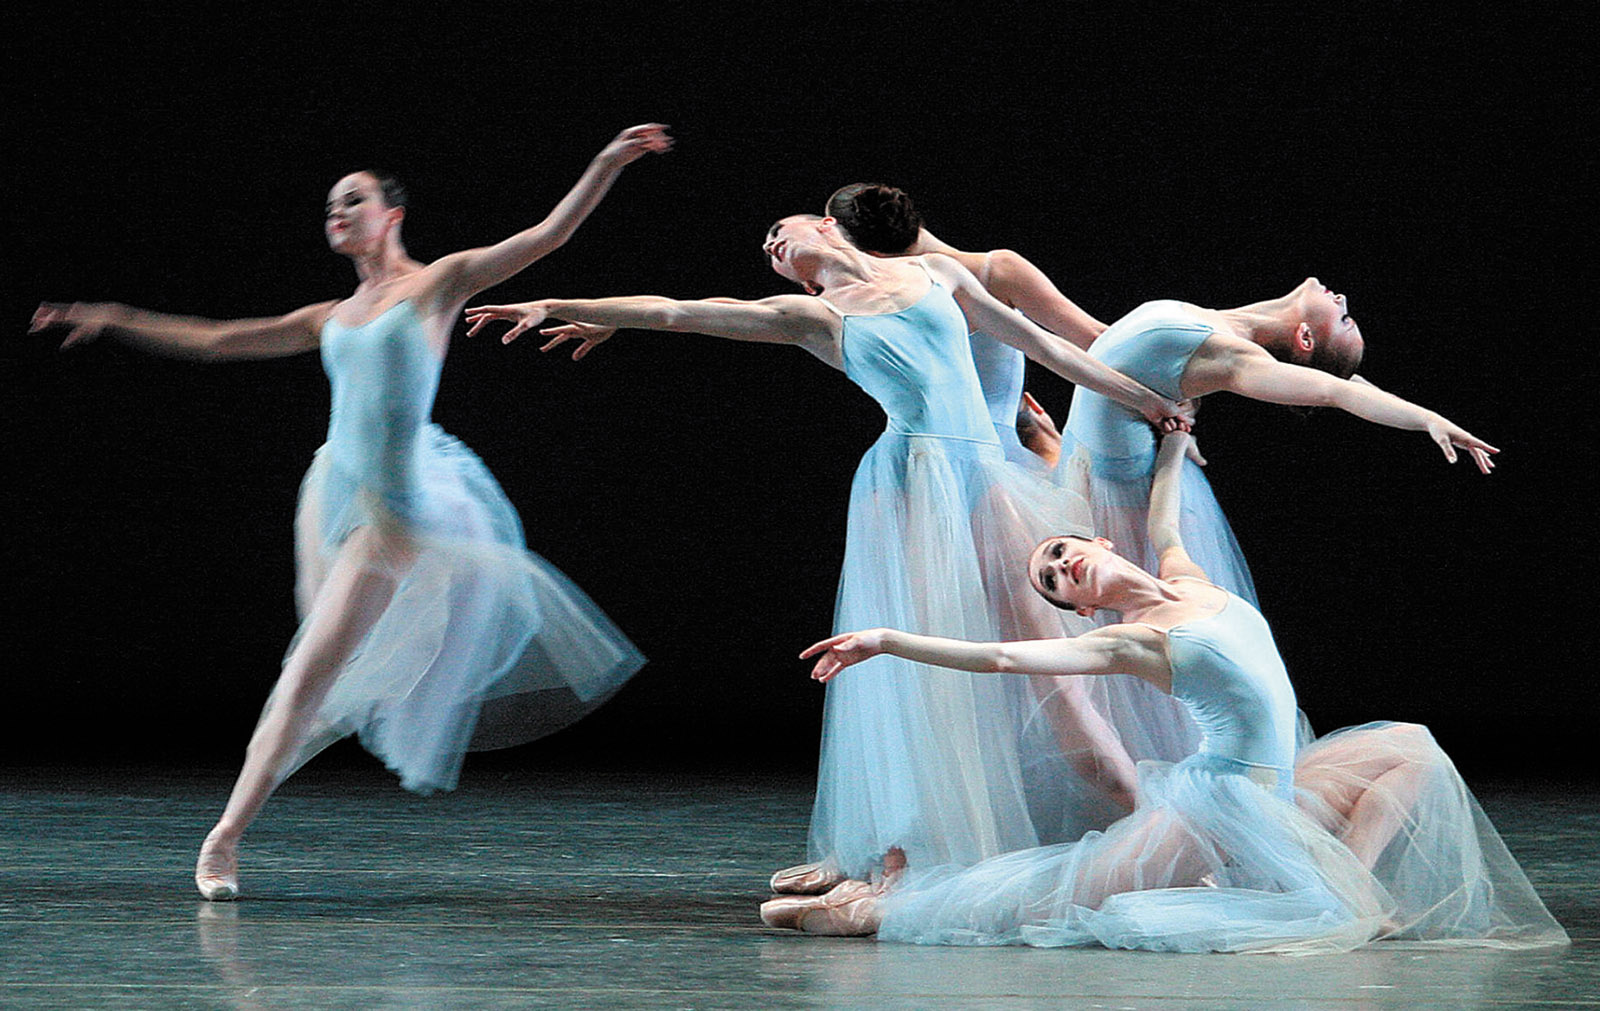 Dancers of the New York City Ballet performing George Balanchine’s Serenade at the Mariinsky Theatre, St. Petersburg, Russia, July 2003